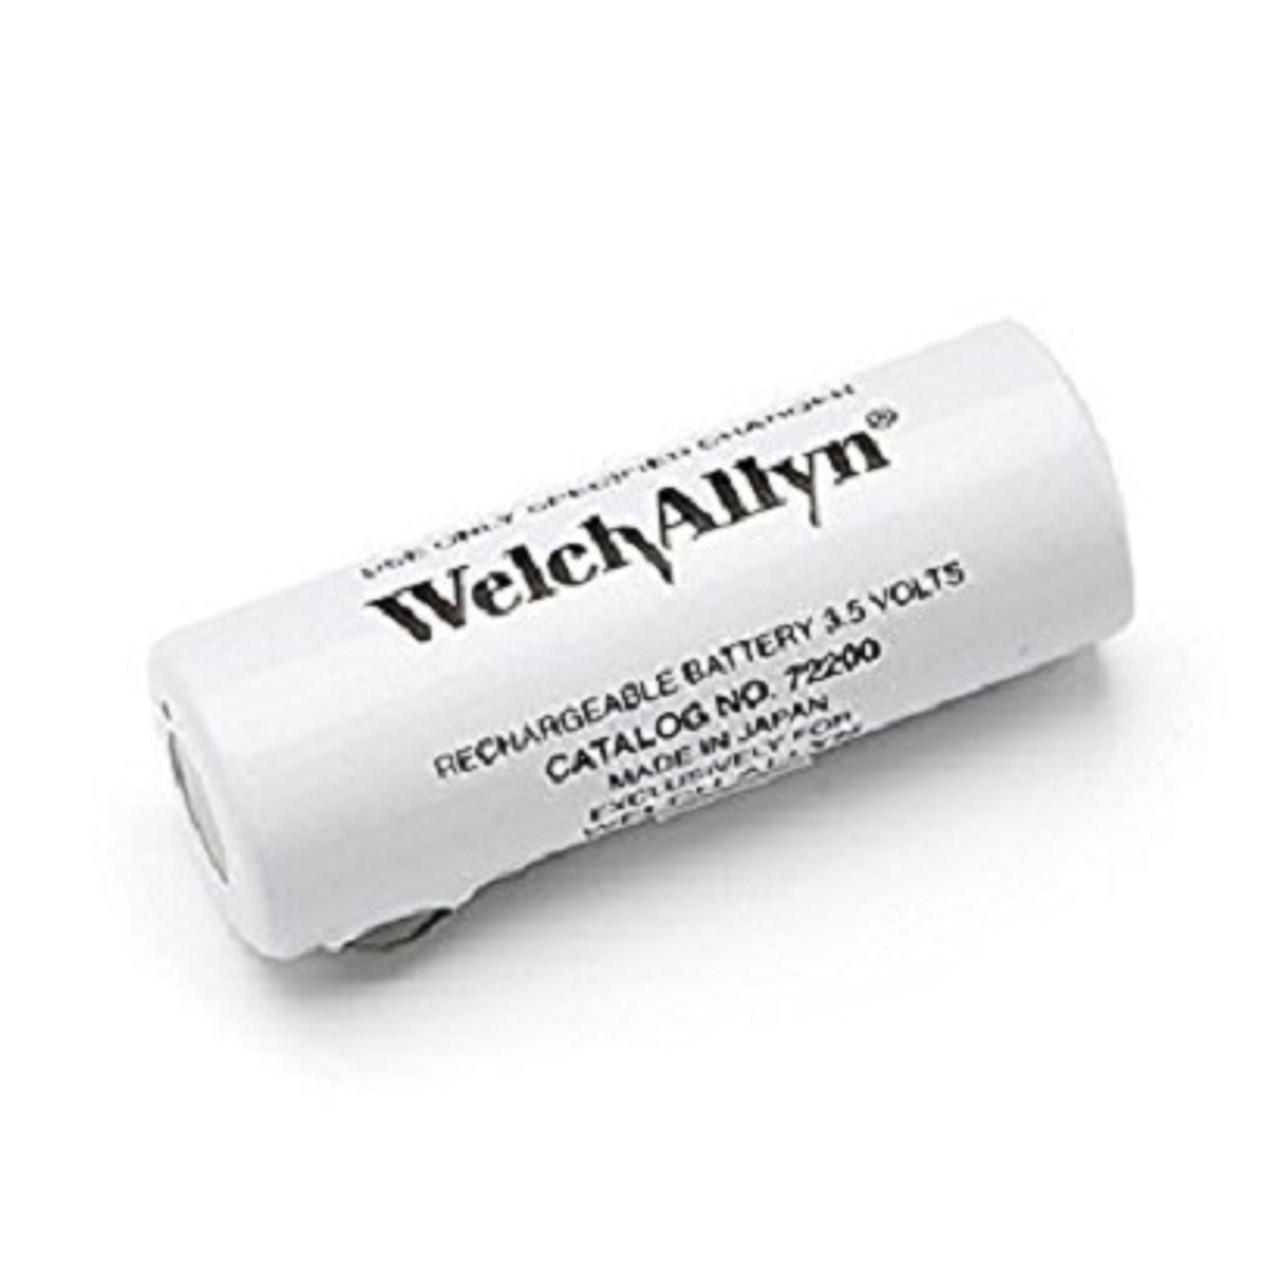 Welch Allyn 72200 OTOSCOPE REPLACEMENT RECHARGEABLE BATTERY 3.5V